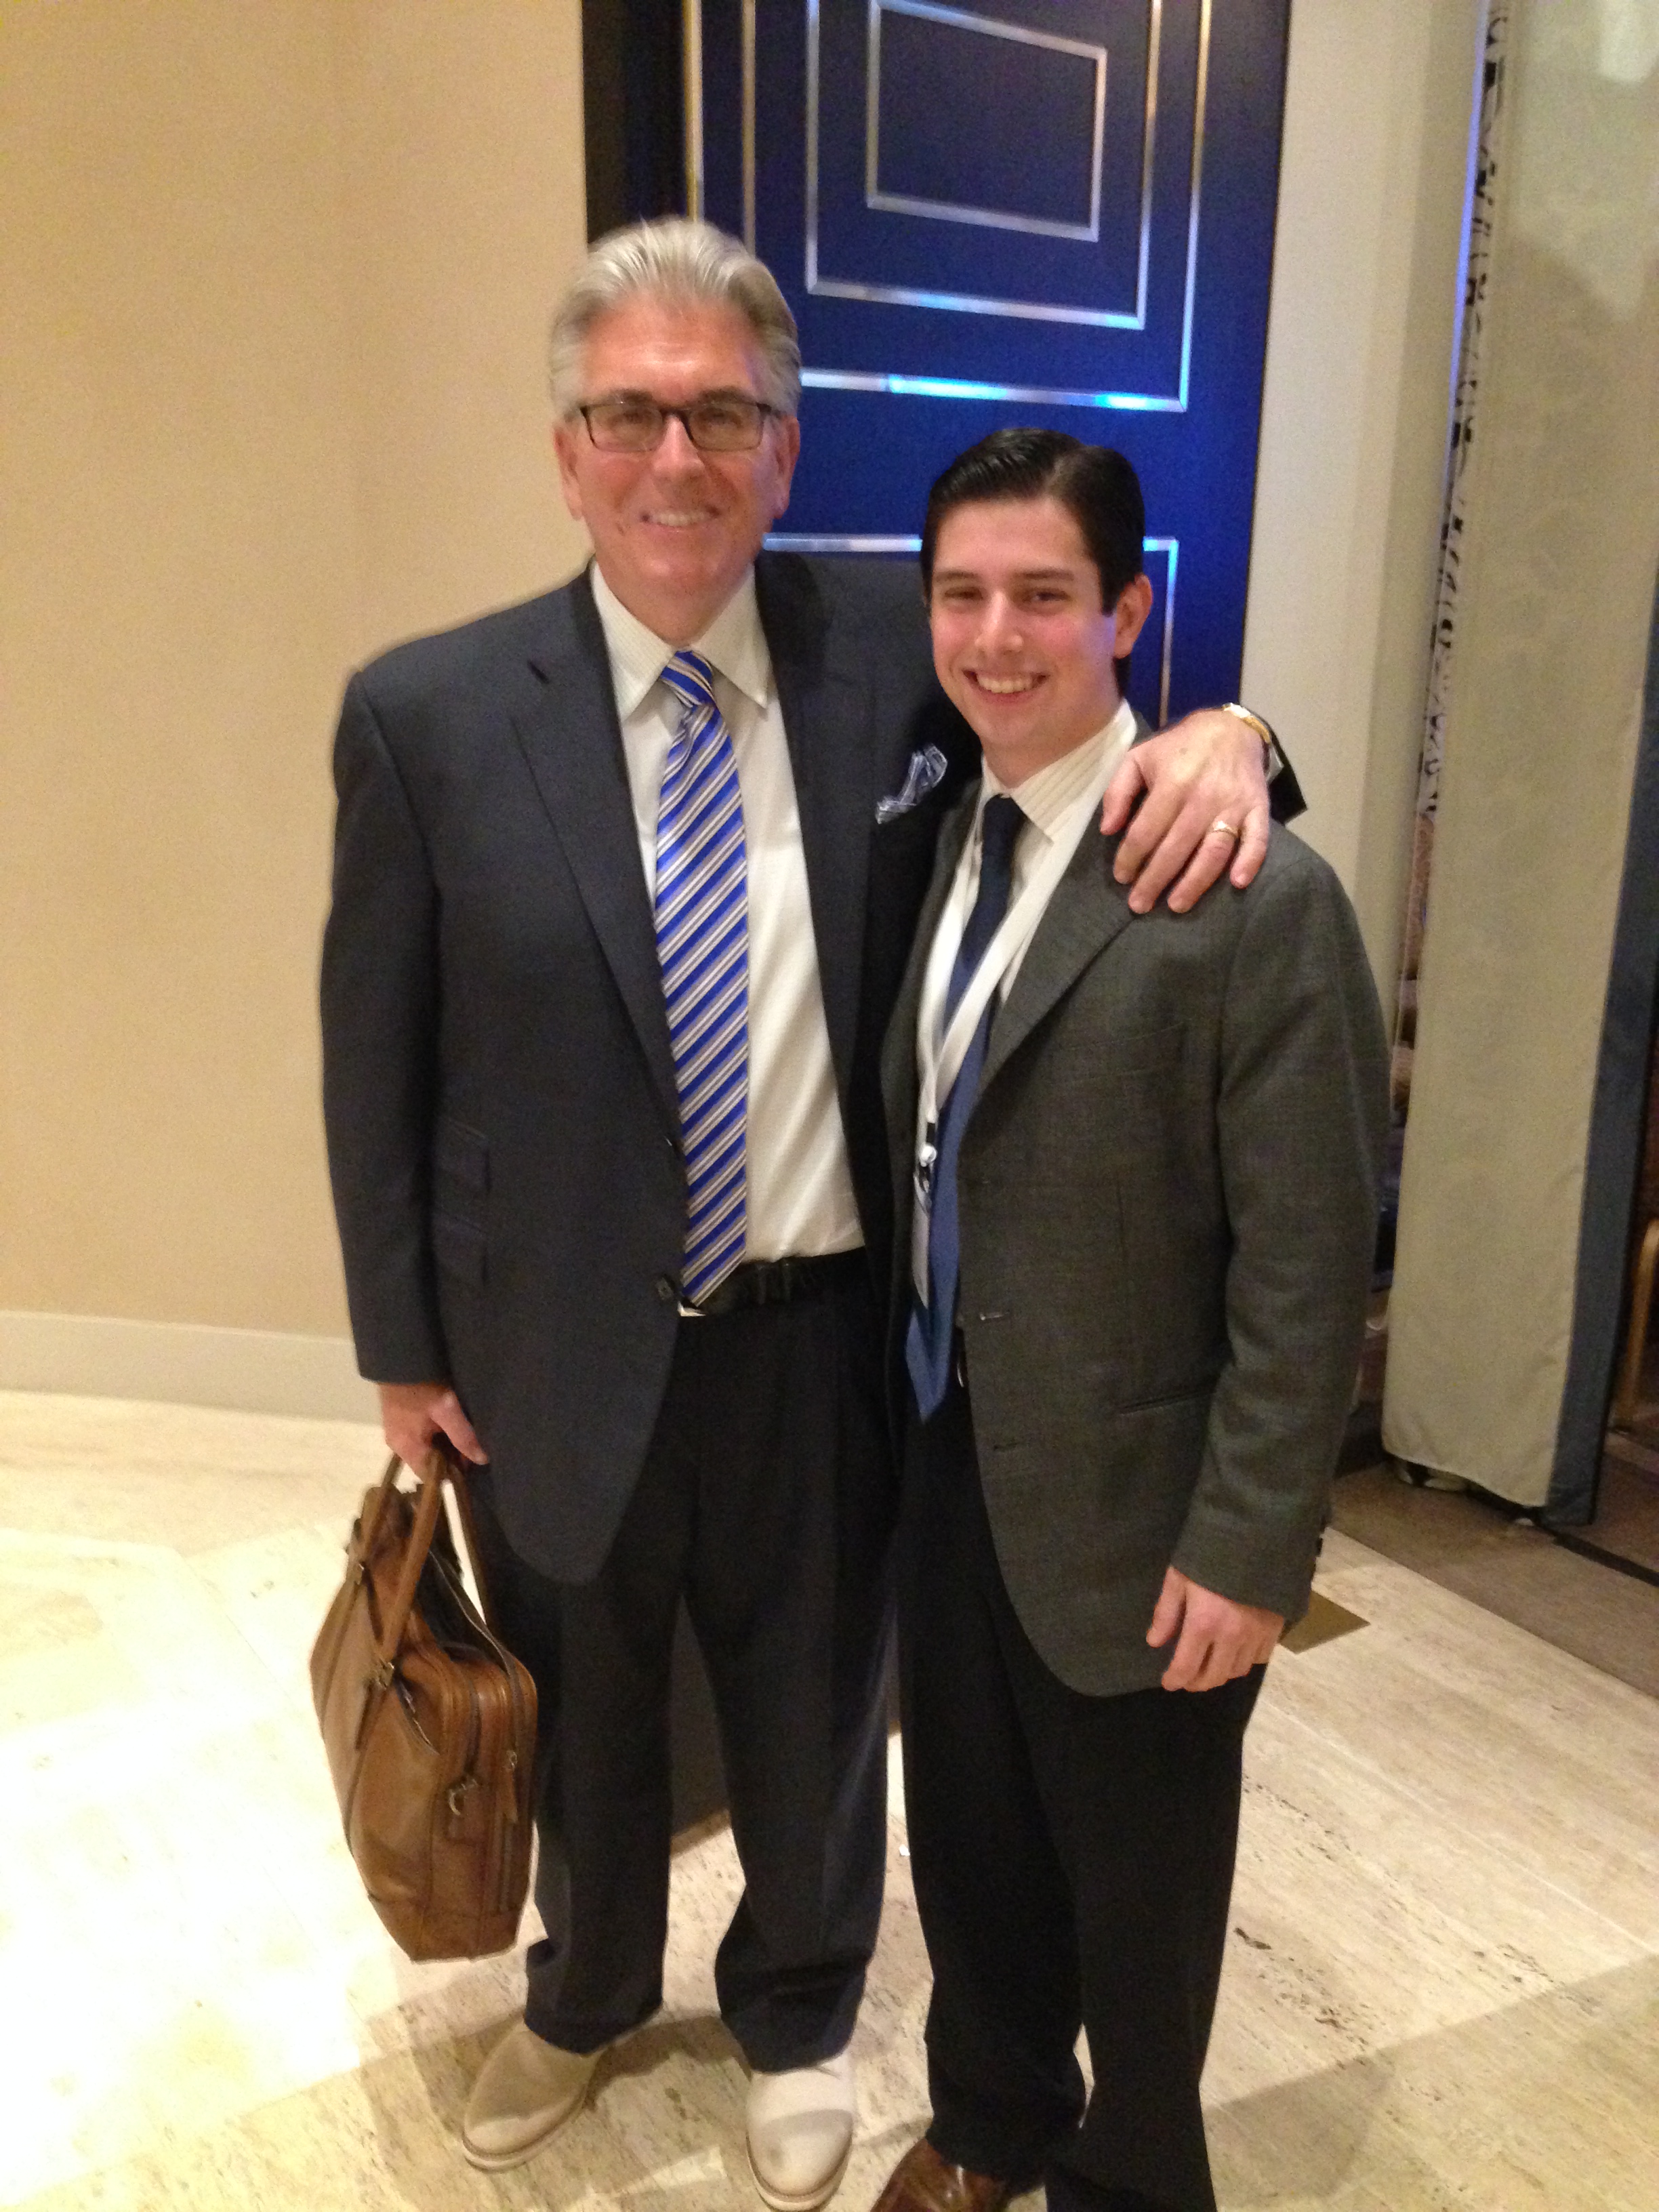 Sports talk show host Mike Francesa (left) poses for a picture with Neil A. Carousso at an event in New York City